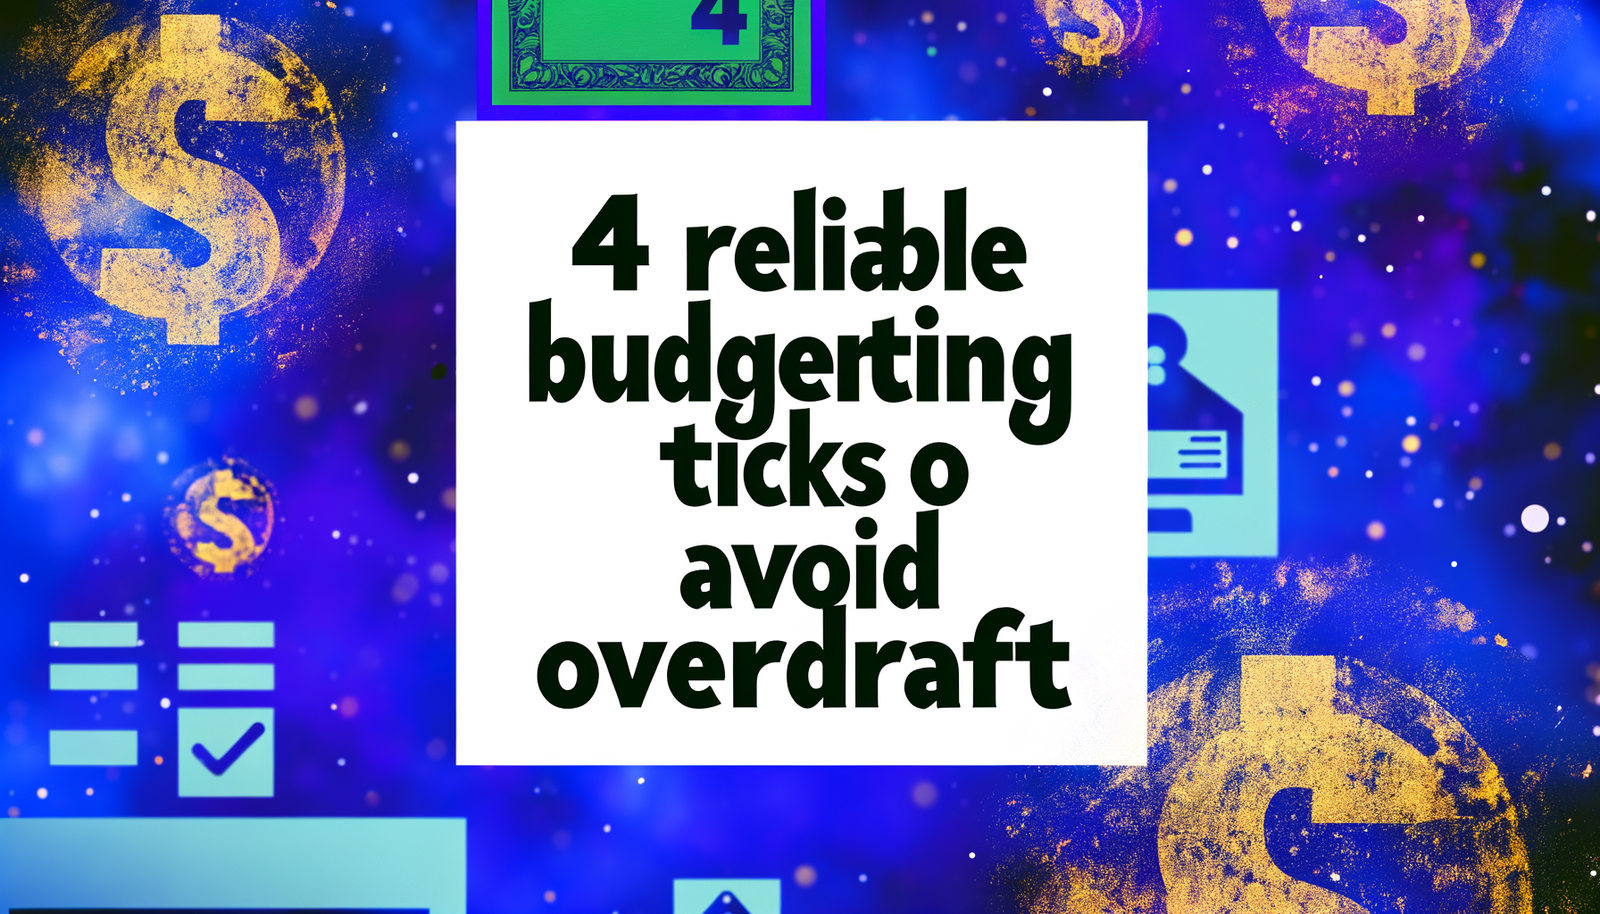 4 Reliable Budgeting Tricks to Avoid Overdraft